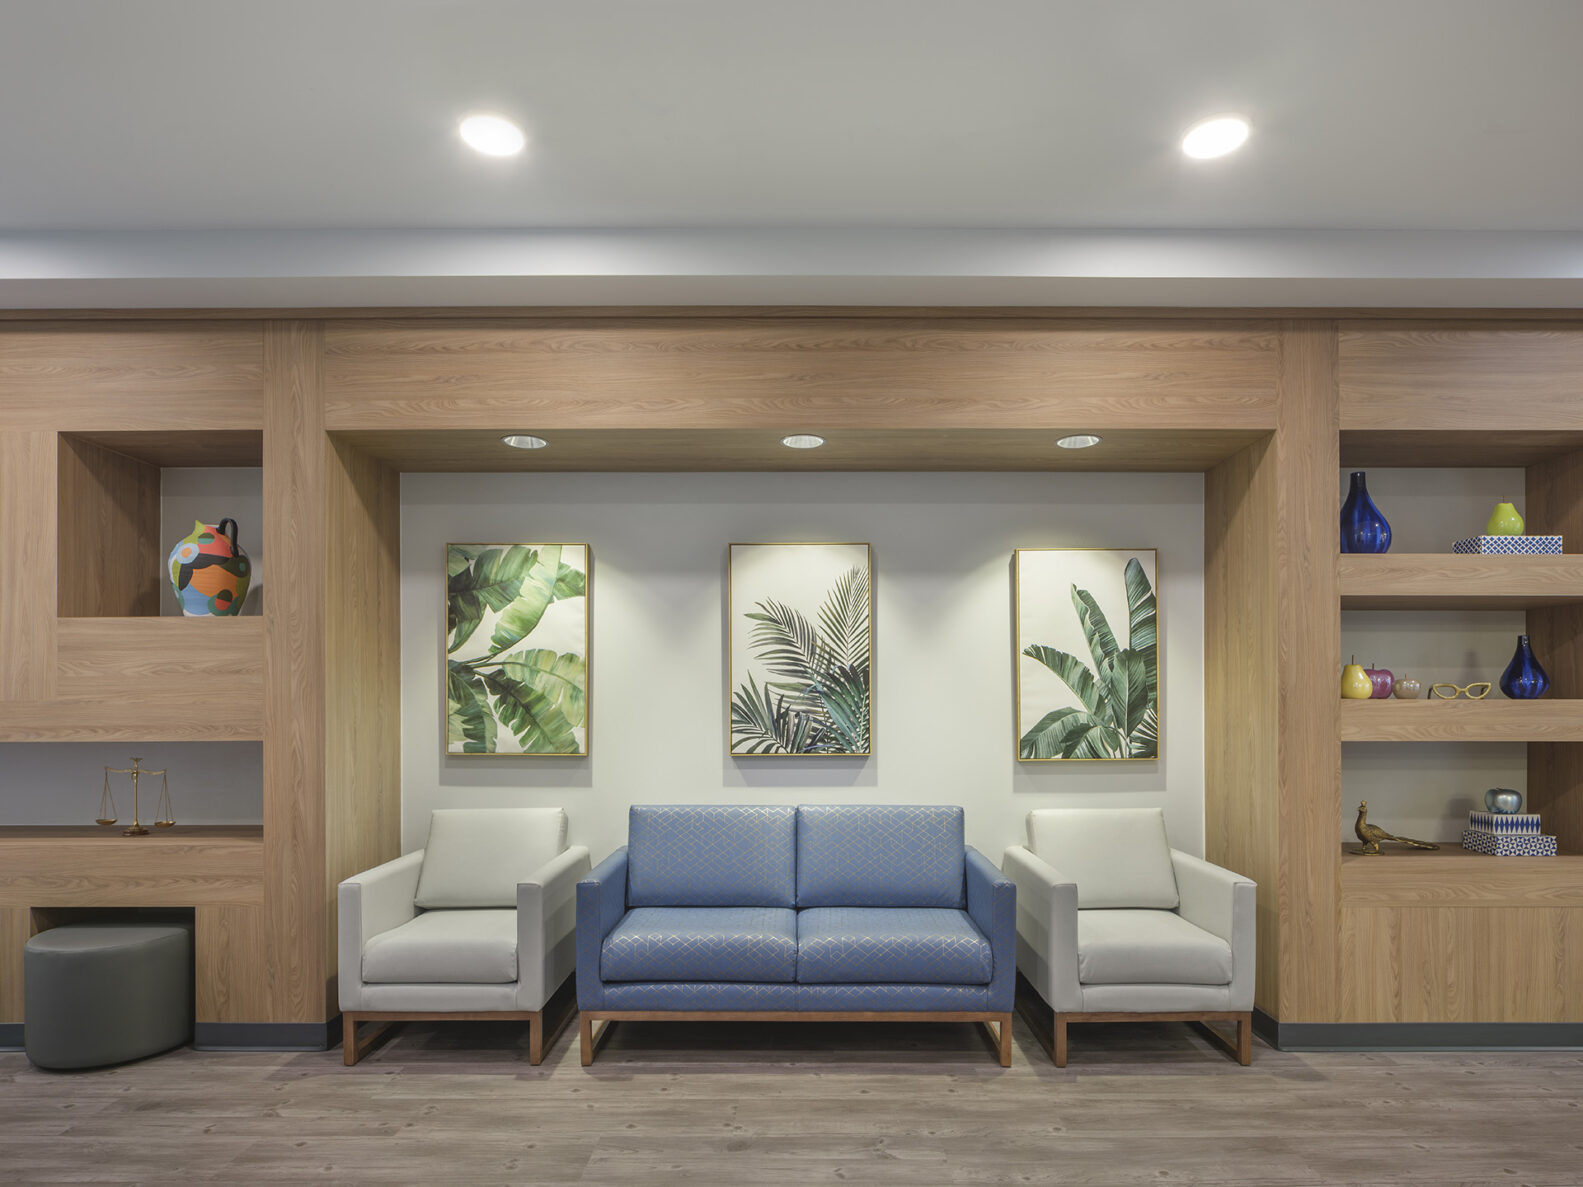 Lobby area to PACE KC Swope Health Adult Wellness Center, built by McCownGordon Construction